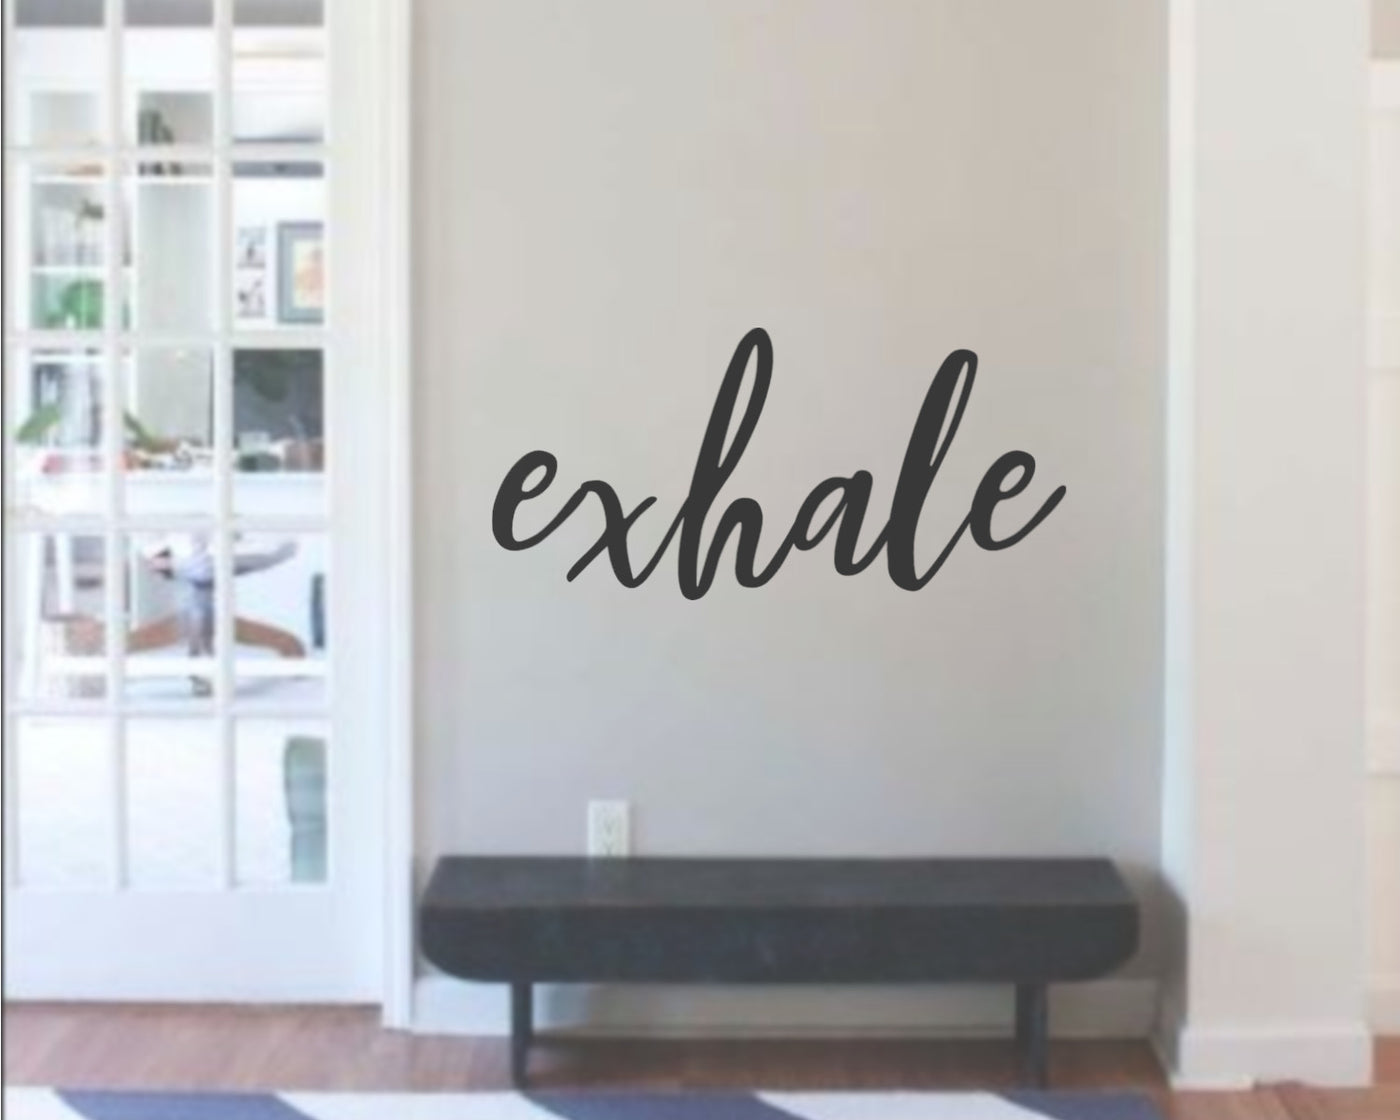 Exhale Metal Word Sign - Madison Iron and Wood - Wall Art - metal outdoor decor - Steel deocrations - american made products - veteran owned business products - fencing decorations - fencing supplies - custom wall decorations - personalized wall signs - steel - decorative post caps - steel post caps - metal post caps - brackets - structural brackets - home improvement - easter - easter decorations - easter gift - easter yard decor